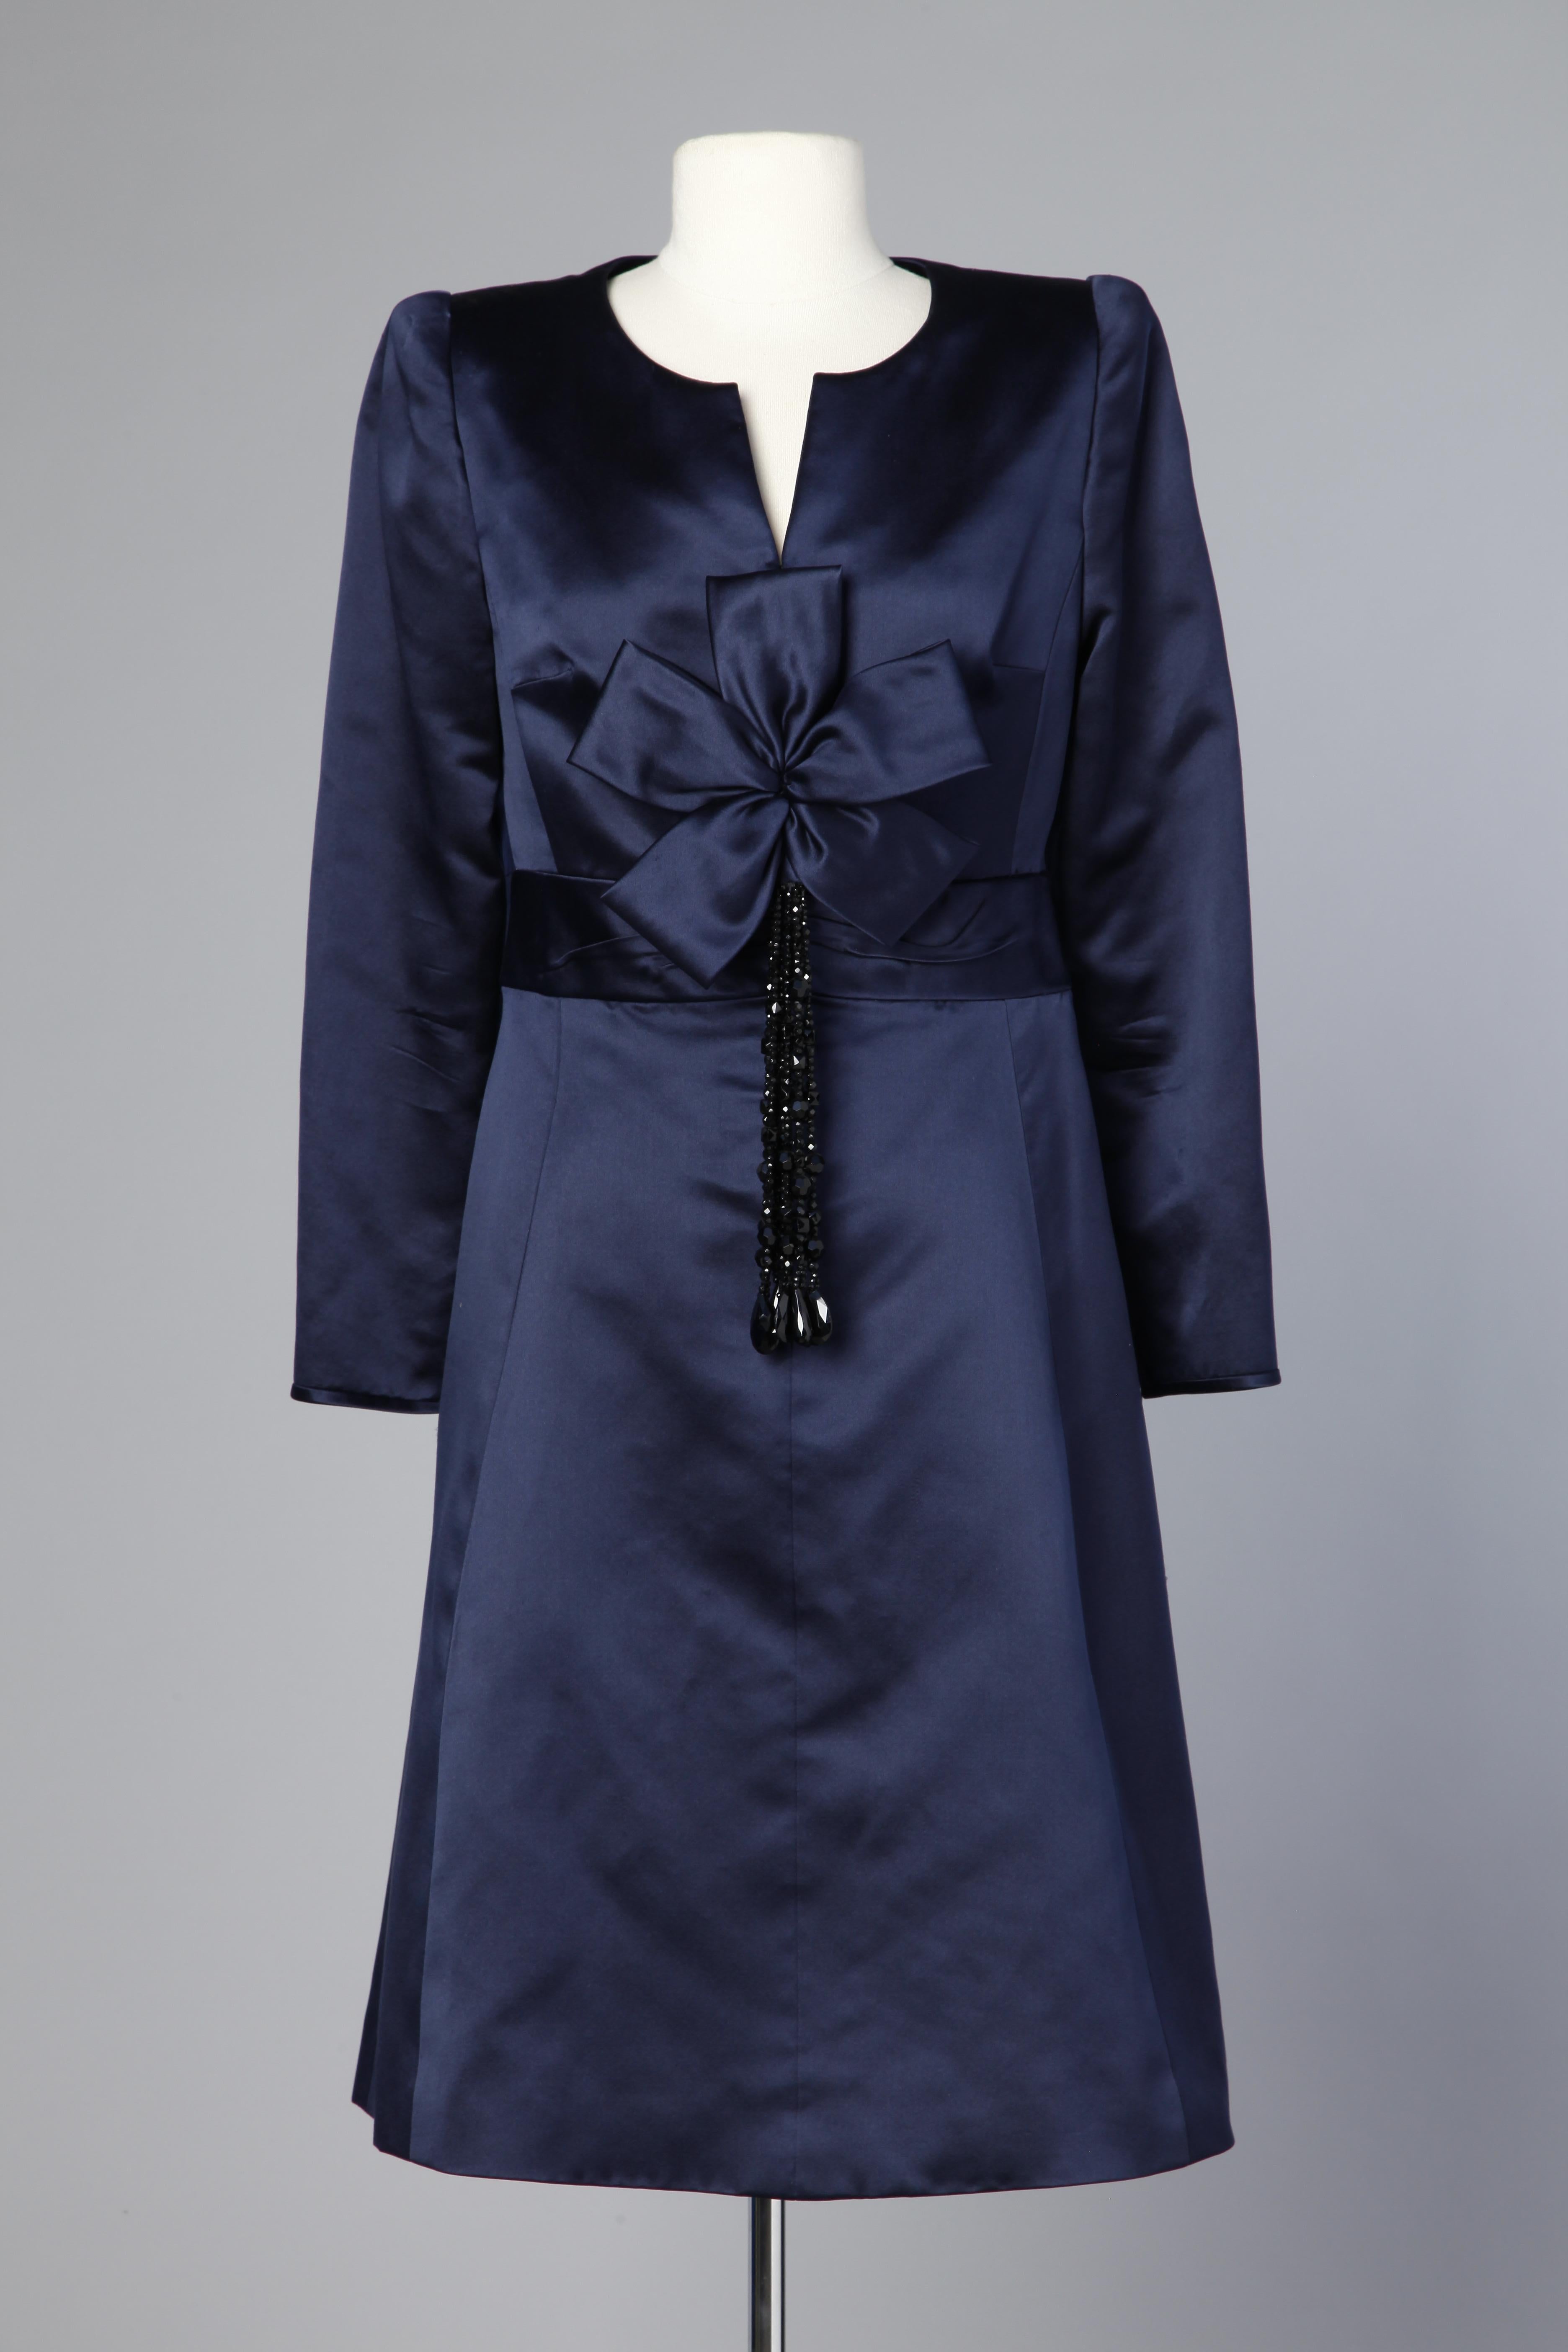 Black 1980's navy blue satin dress with bow and black beads fringes Valentino Couture For Sale